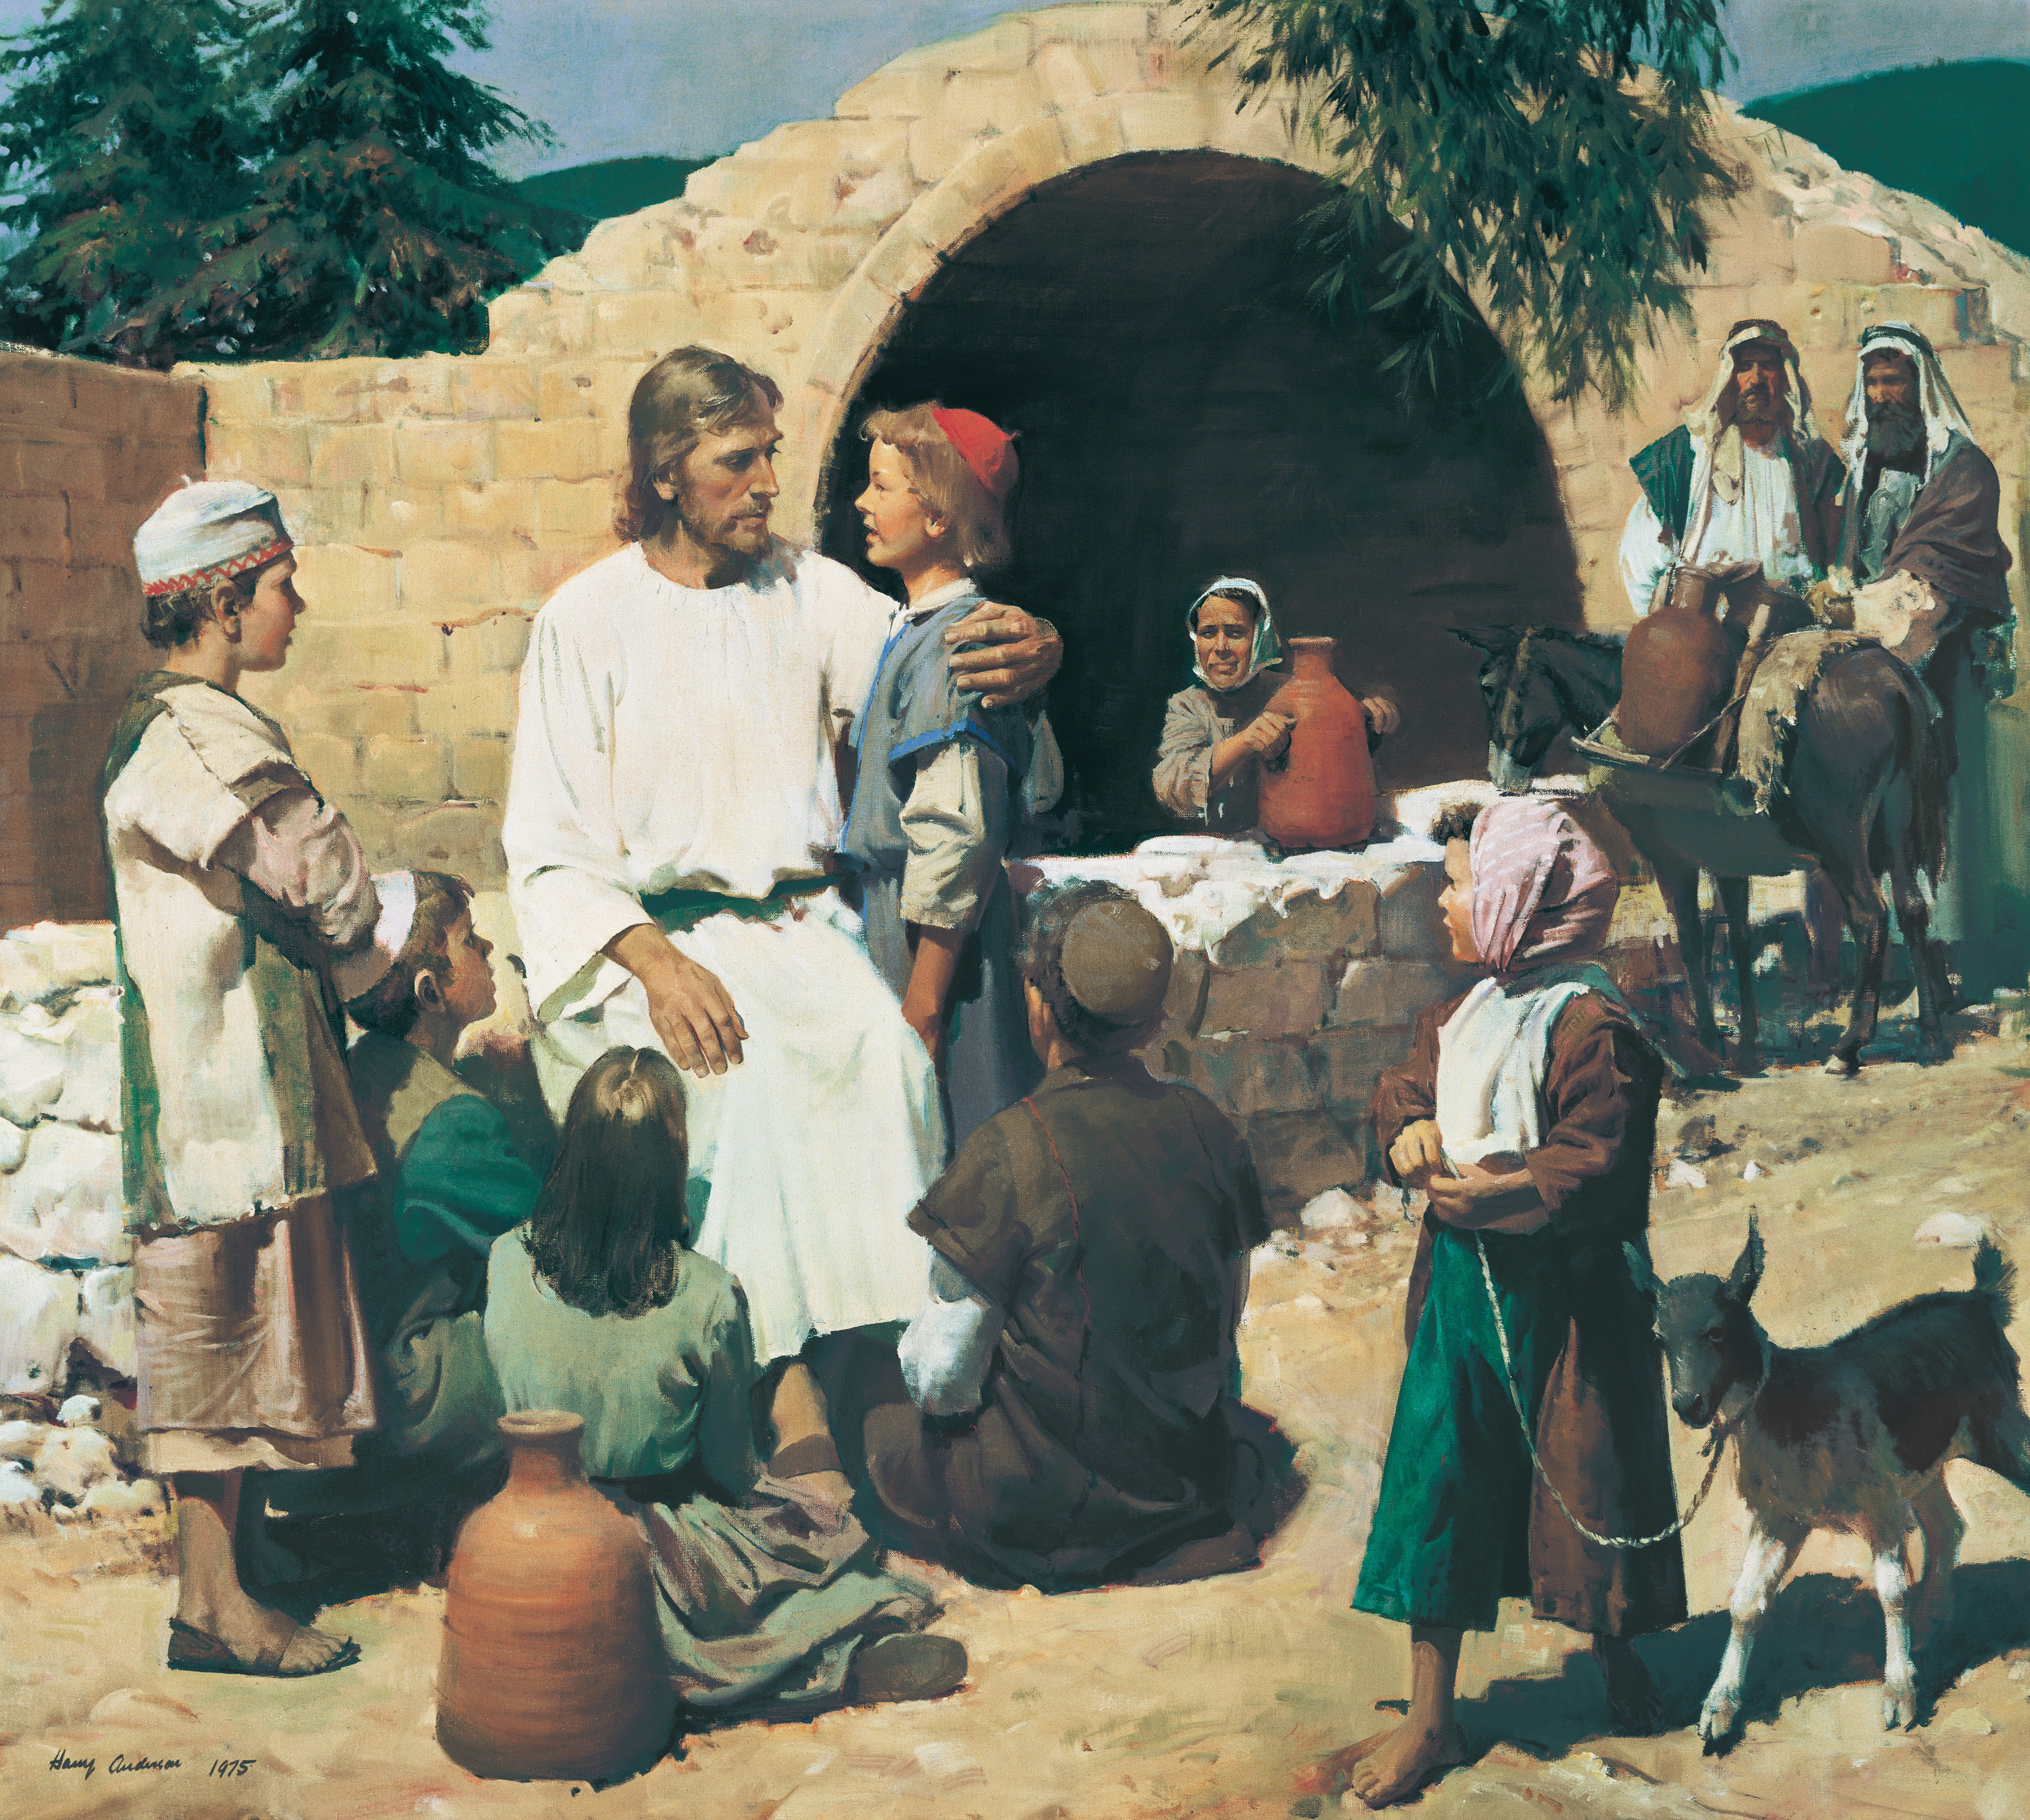 Christ sitting on a stone wall with His arm around a boy while five other children gather around.